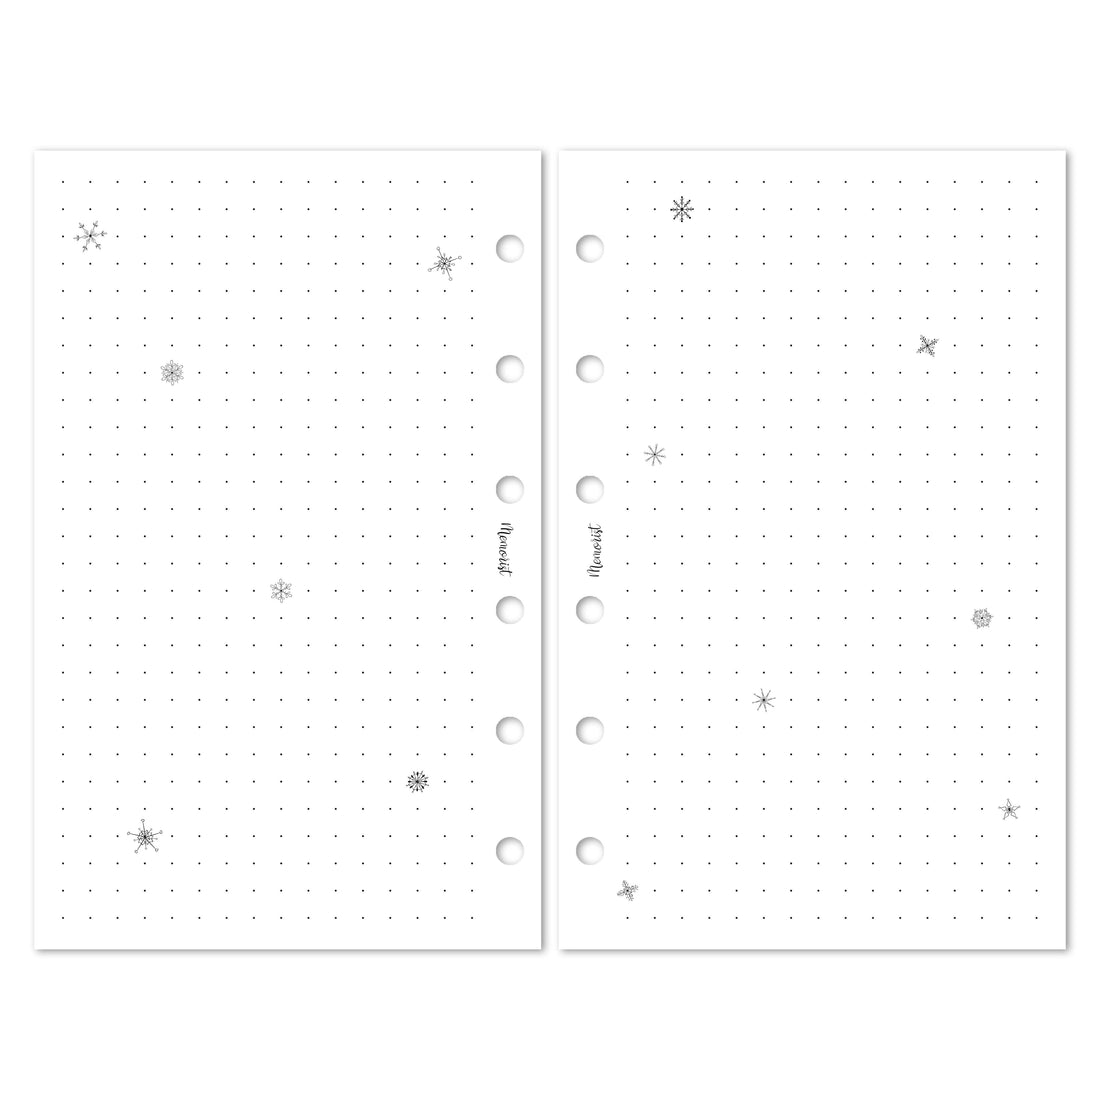 Dotted Snowflake Grid (Pocket Size Refill)